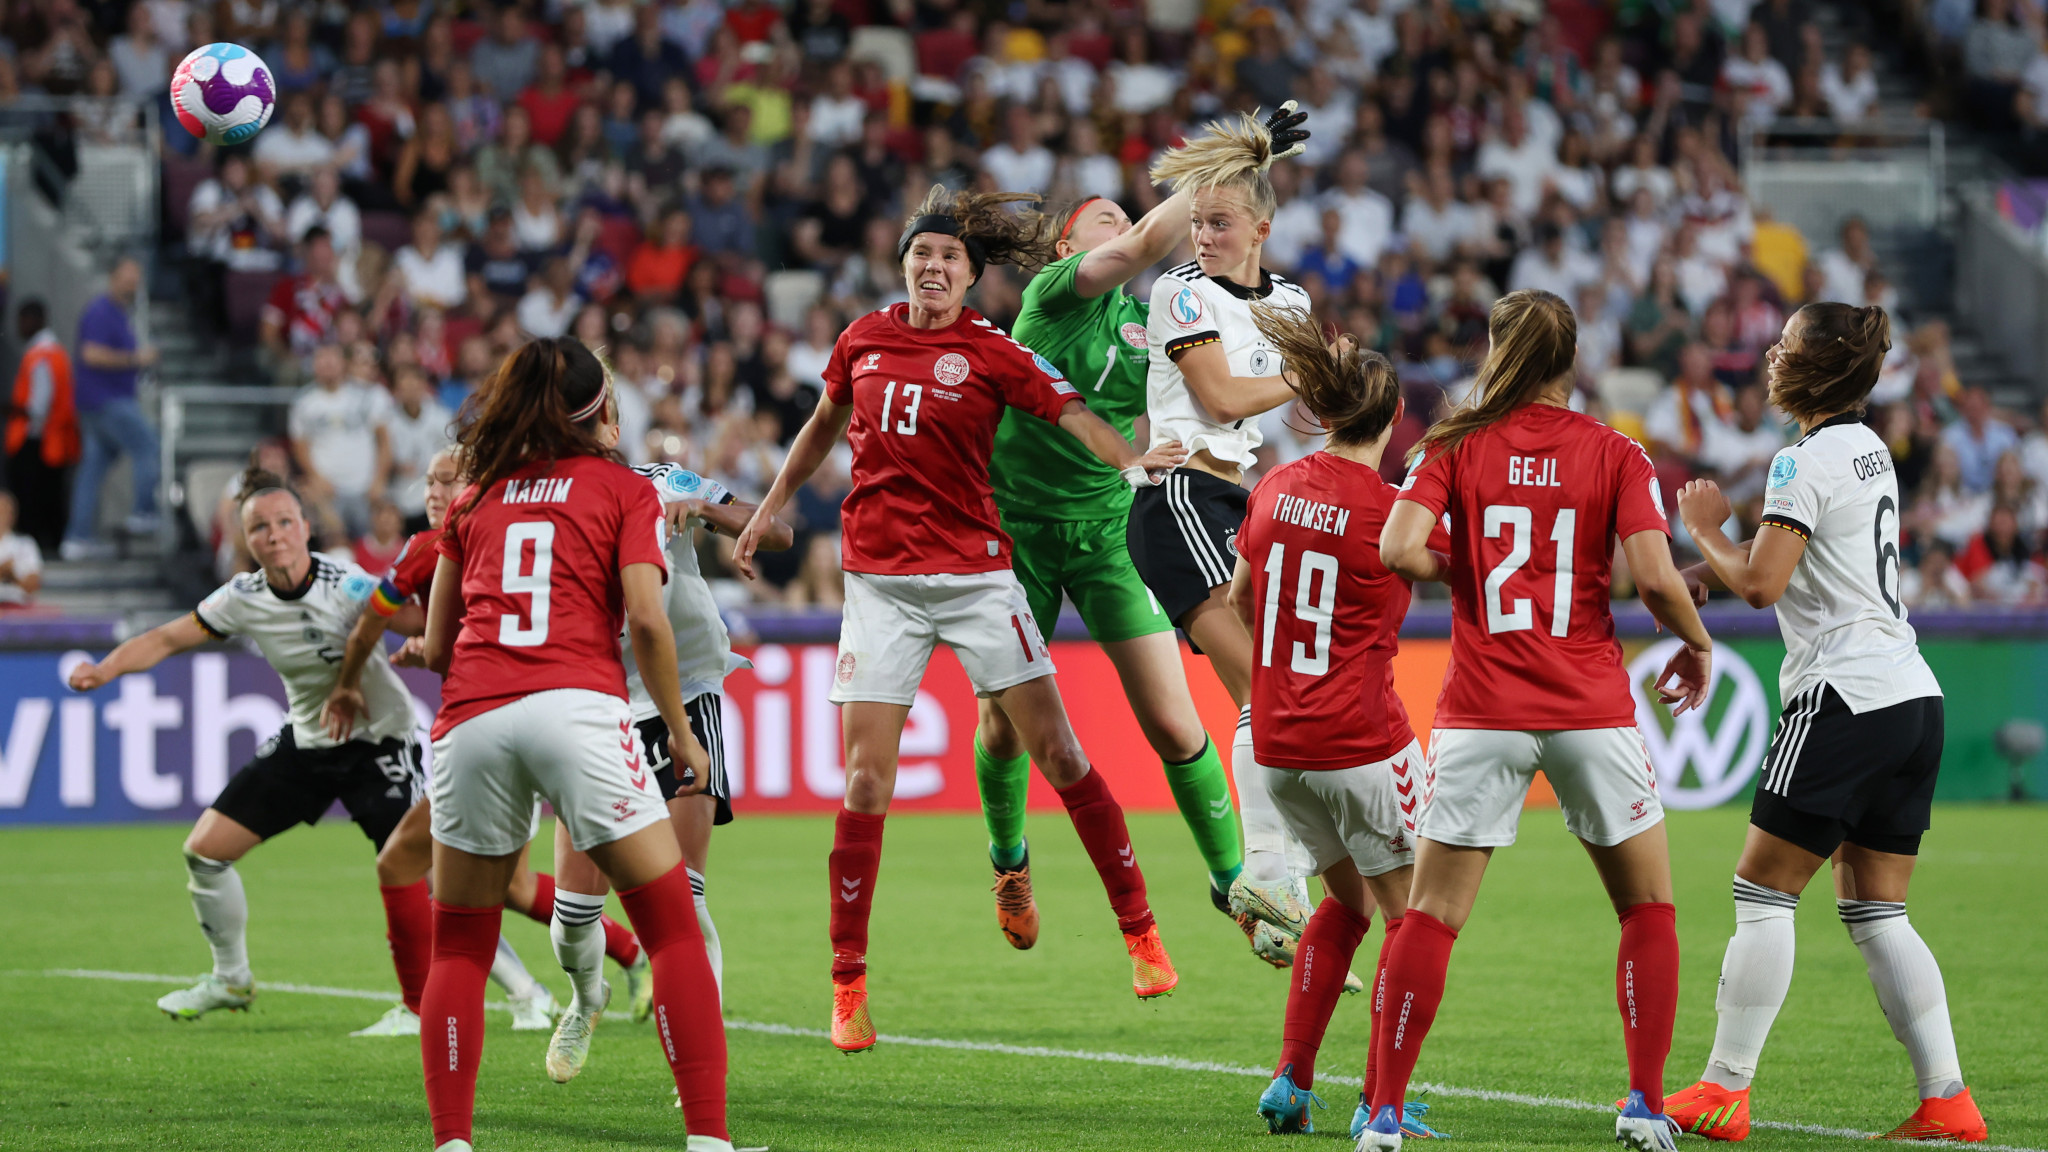 Lea Schuller headed in Germany's second goal as they beat Denmark 4-0 at UEFA Women's Euro 2022 ©Getty Images